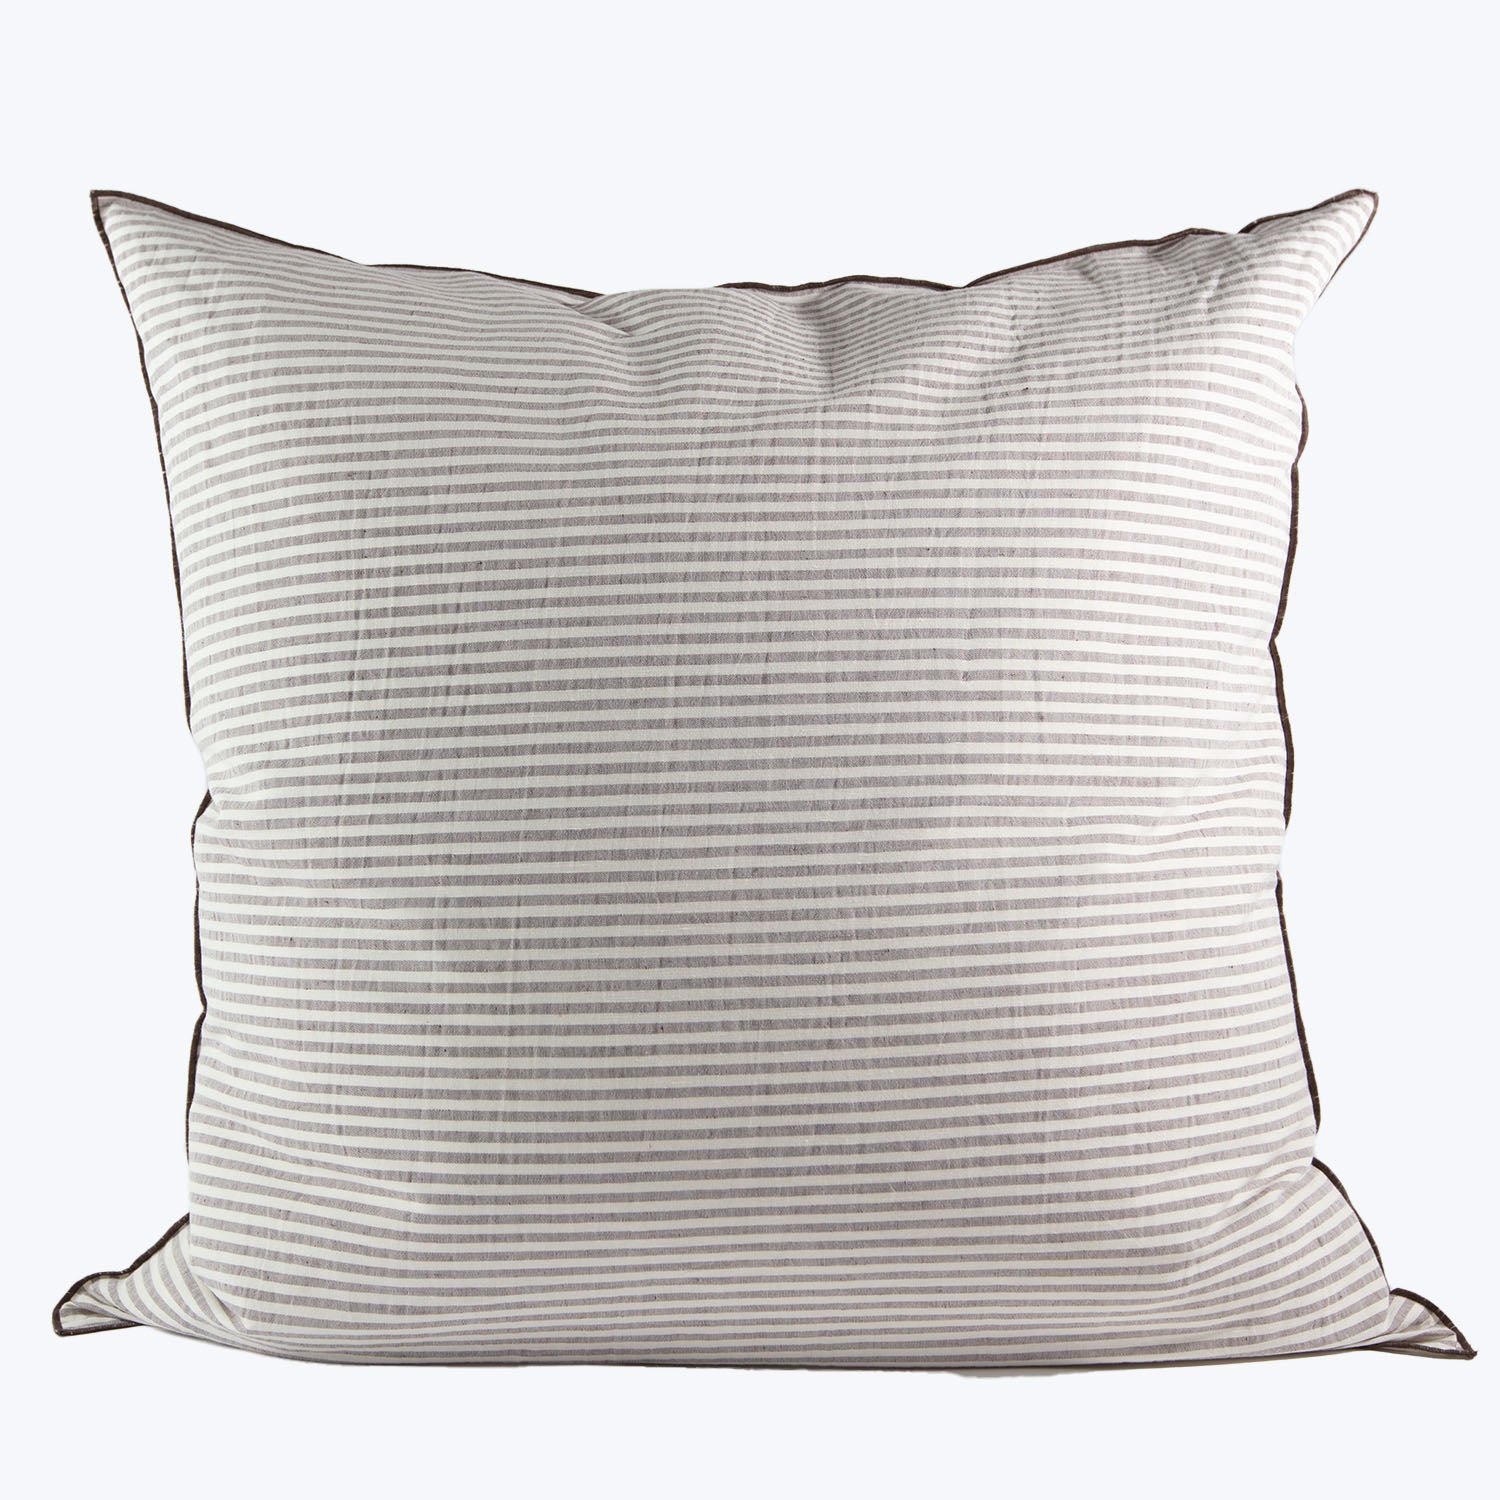 Square decorative pillow with striped pattern and plump filling.